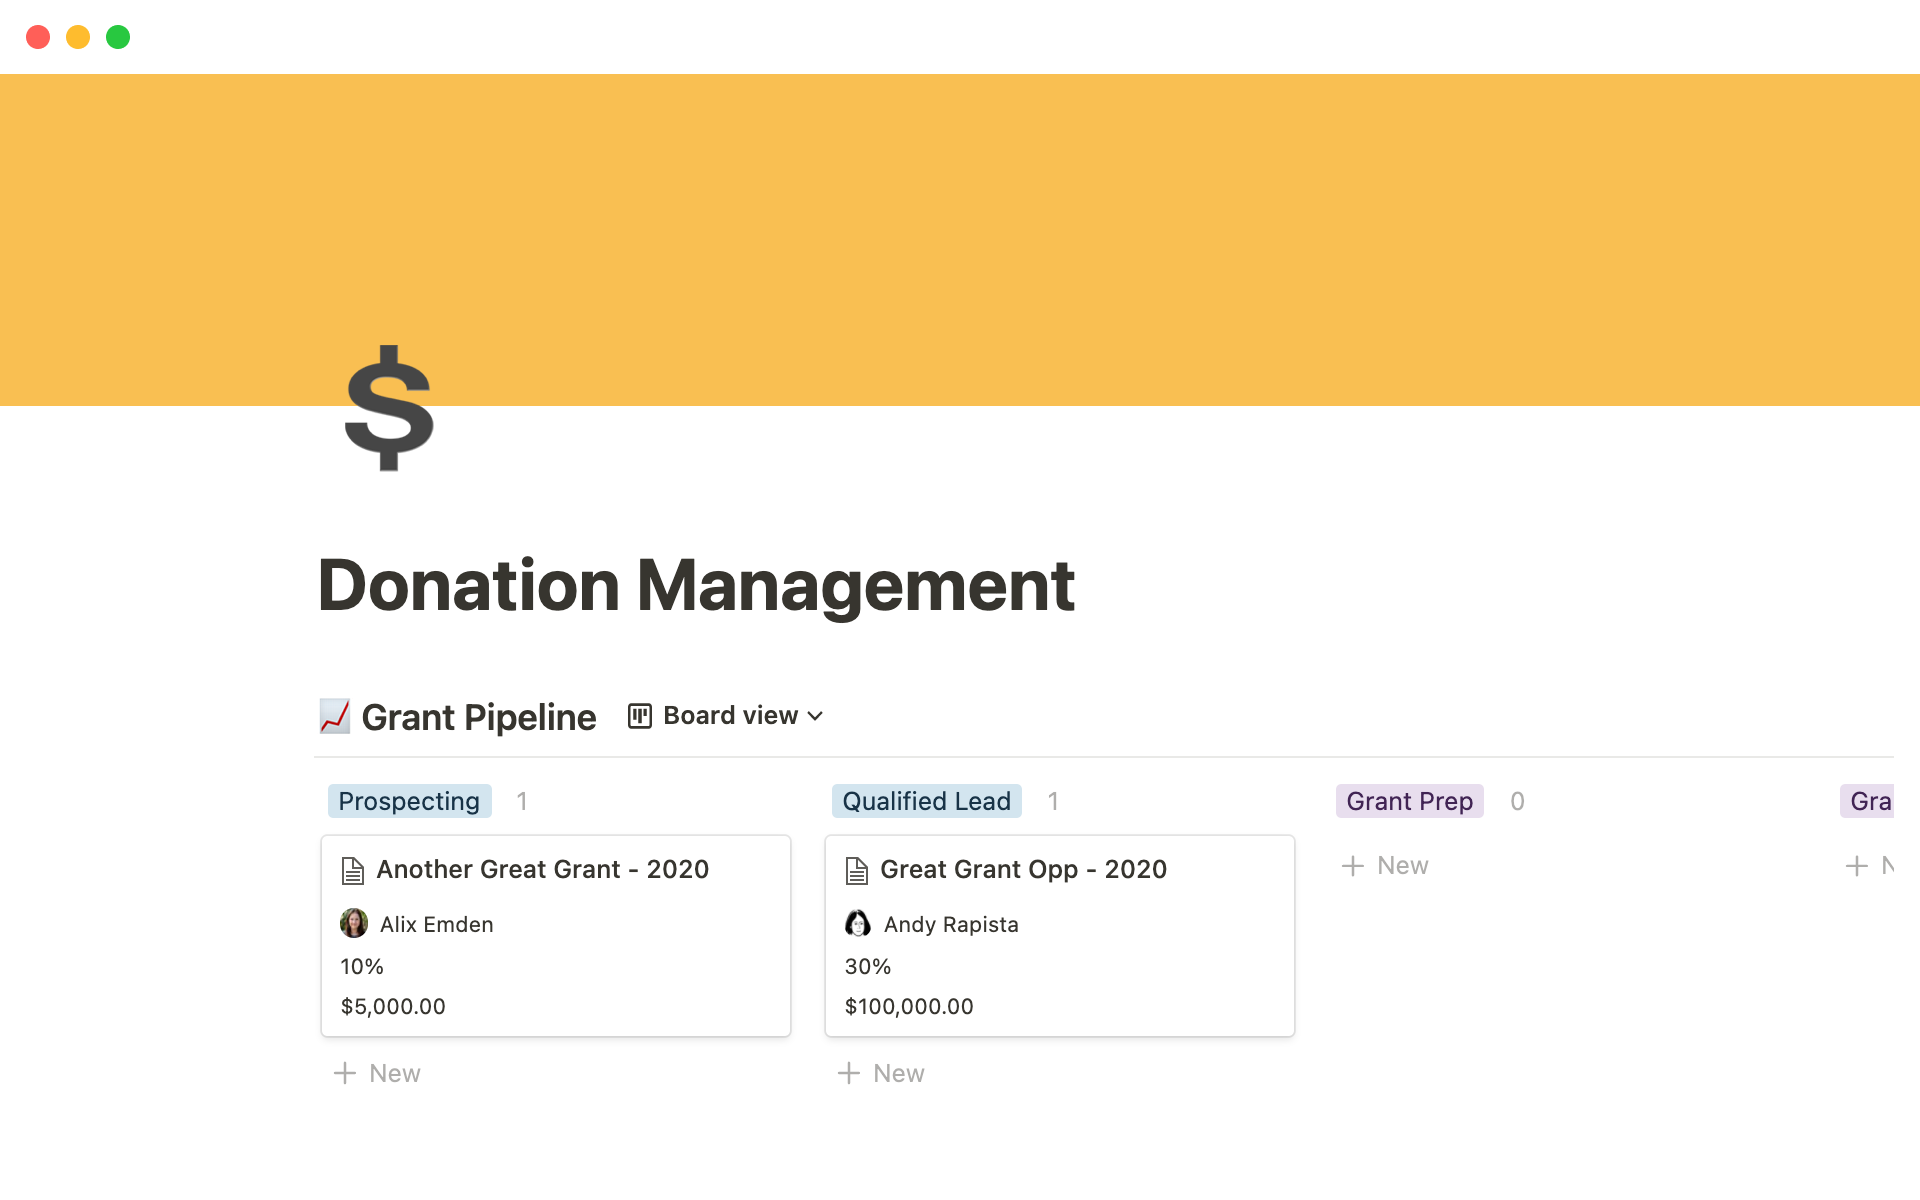 The desktop image for the Donation management template